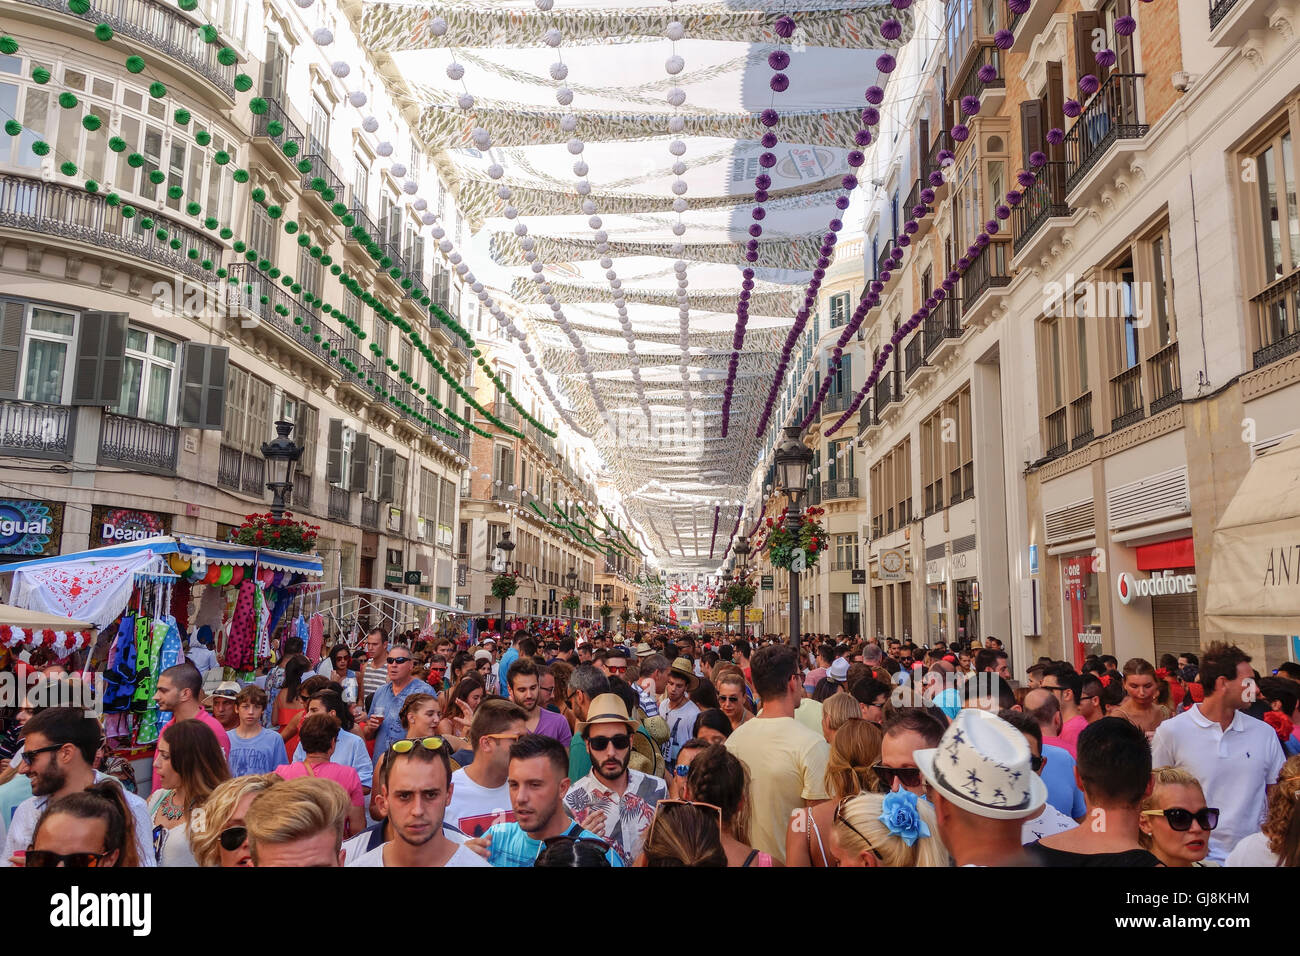 Malaga, Andalusia, Spain. 13th Aug, 2016. Crowd at Calle Larios, main street, celebrating start of Annual Feria of Malaga, Southern Spain's biggest summer fair starts. The feria celebrations. Credit:  Perry van Munster/Alamy Live News Stock Photo